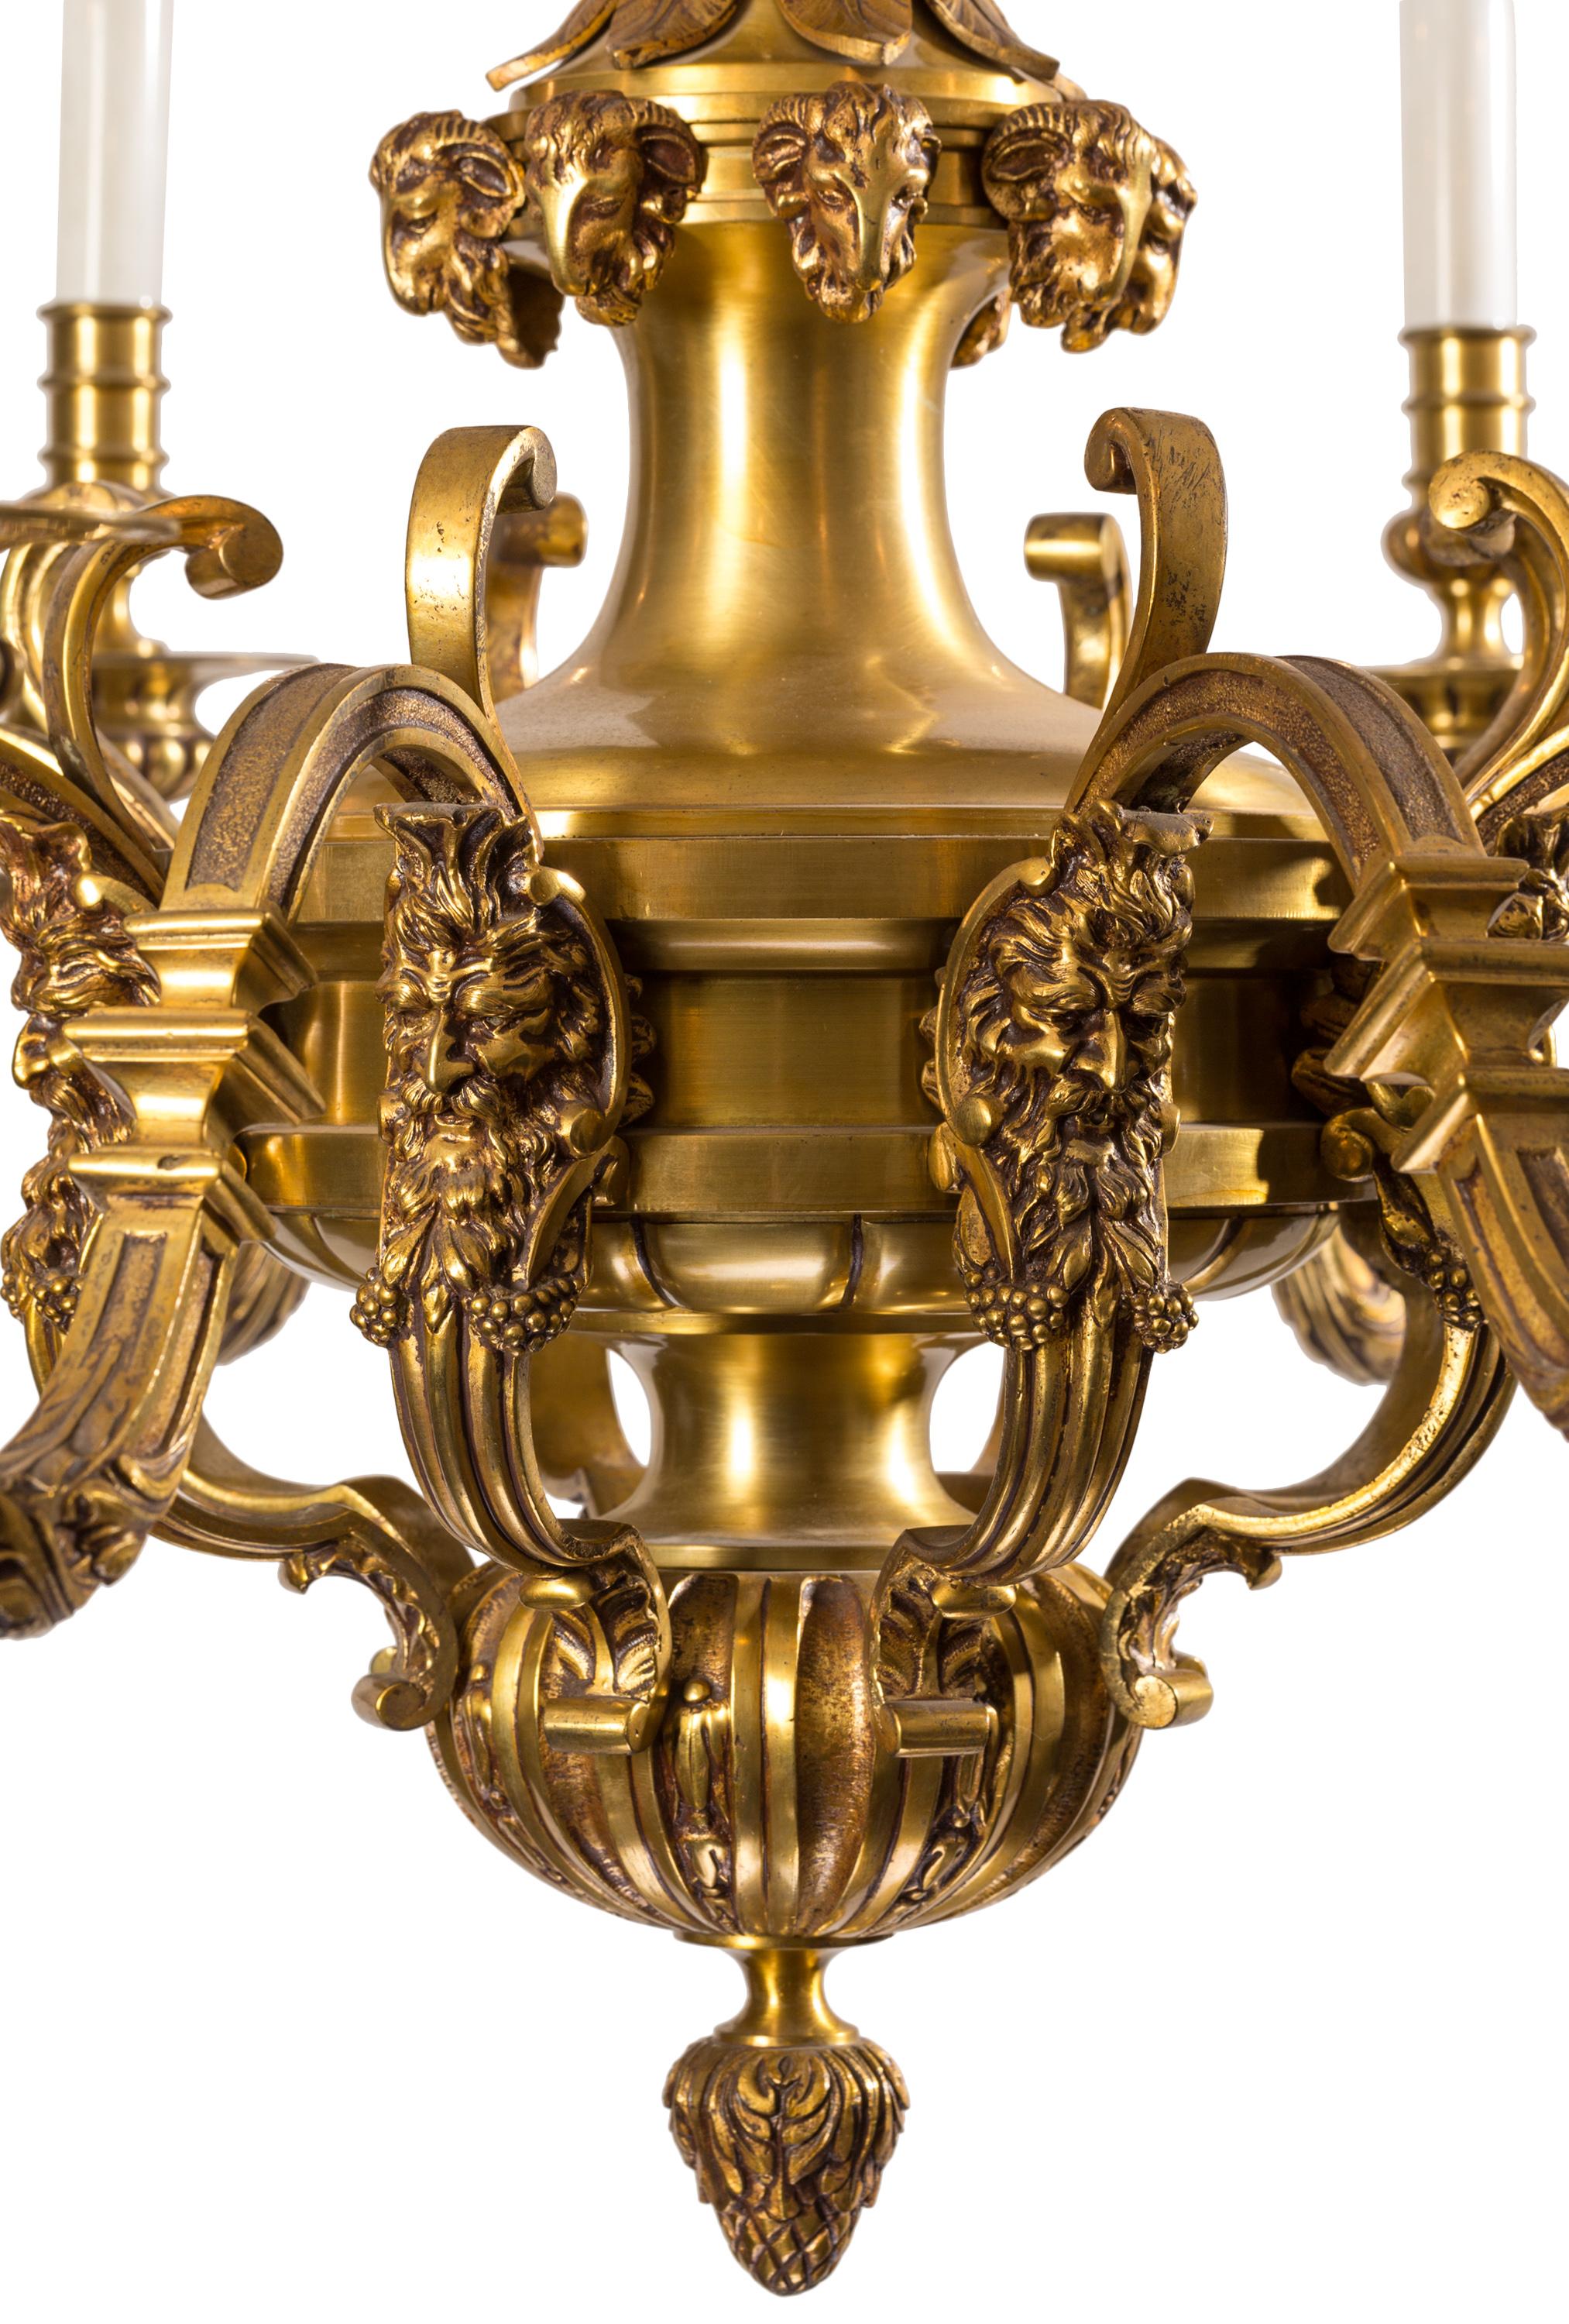 This impressive late 19th century French eight-light brass chandelier in Louis XV style shares many design elements with one made in circa 1700 by André-Charles Boulle for King Frederick II of Prussia. The center column of both chandeliers is